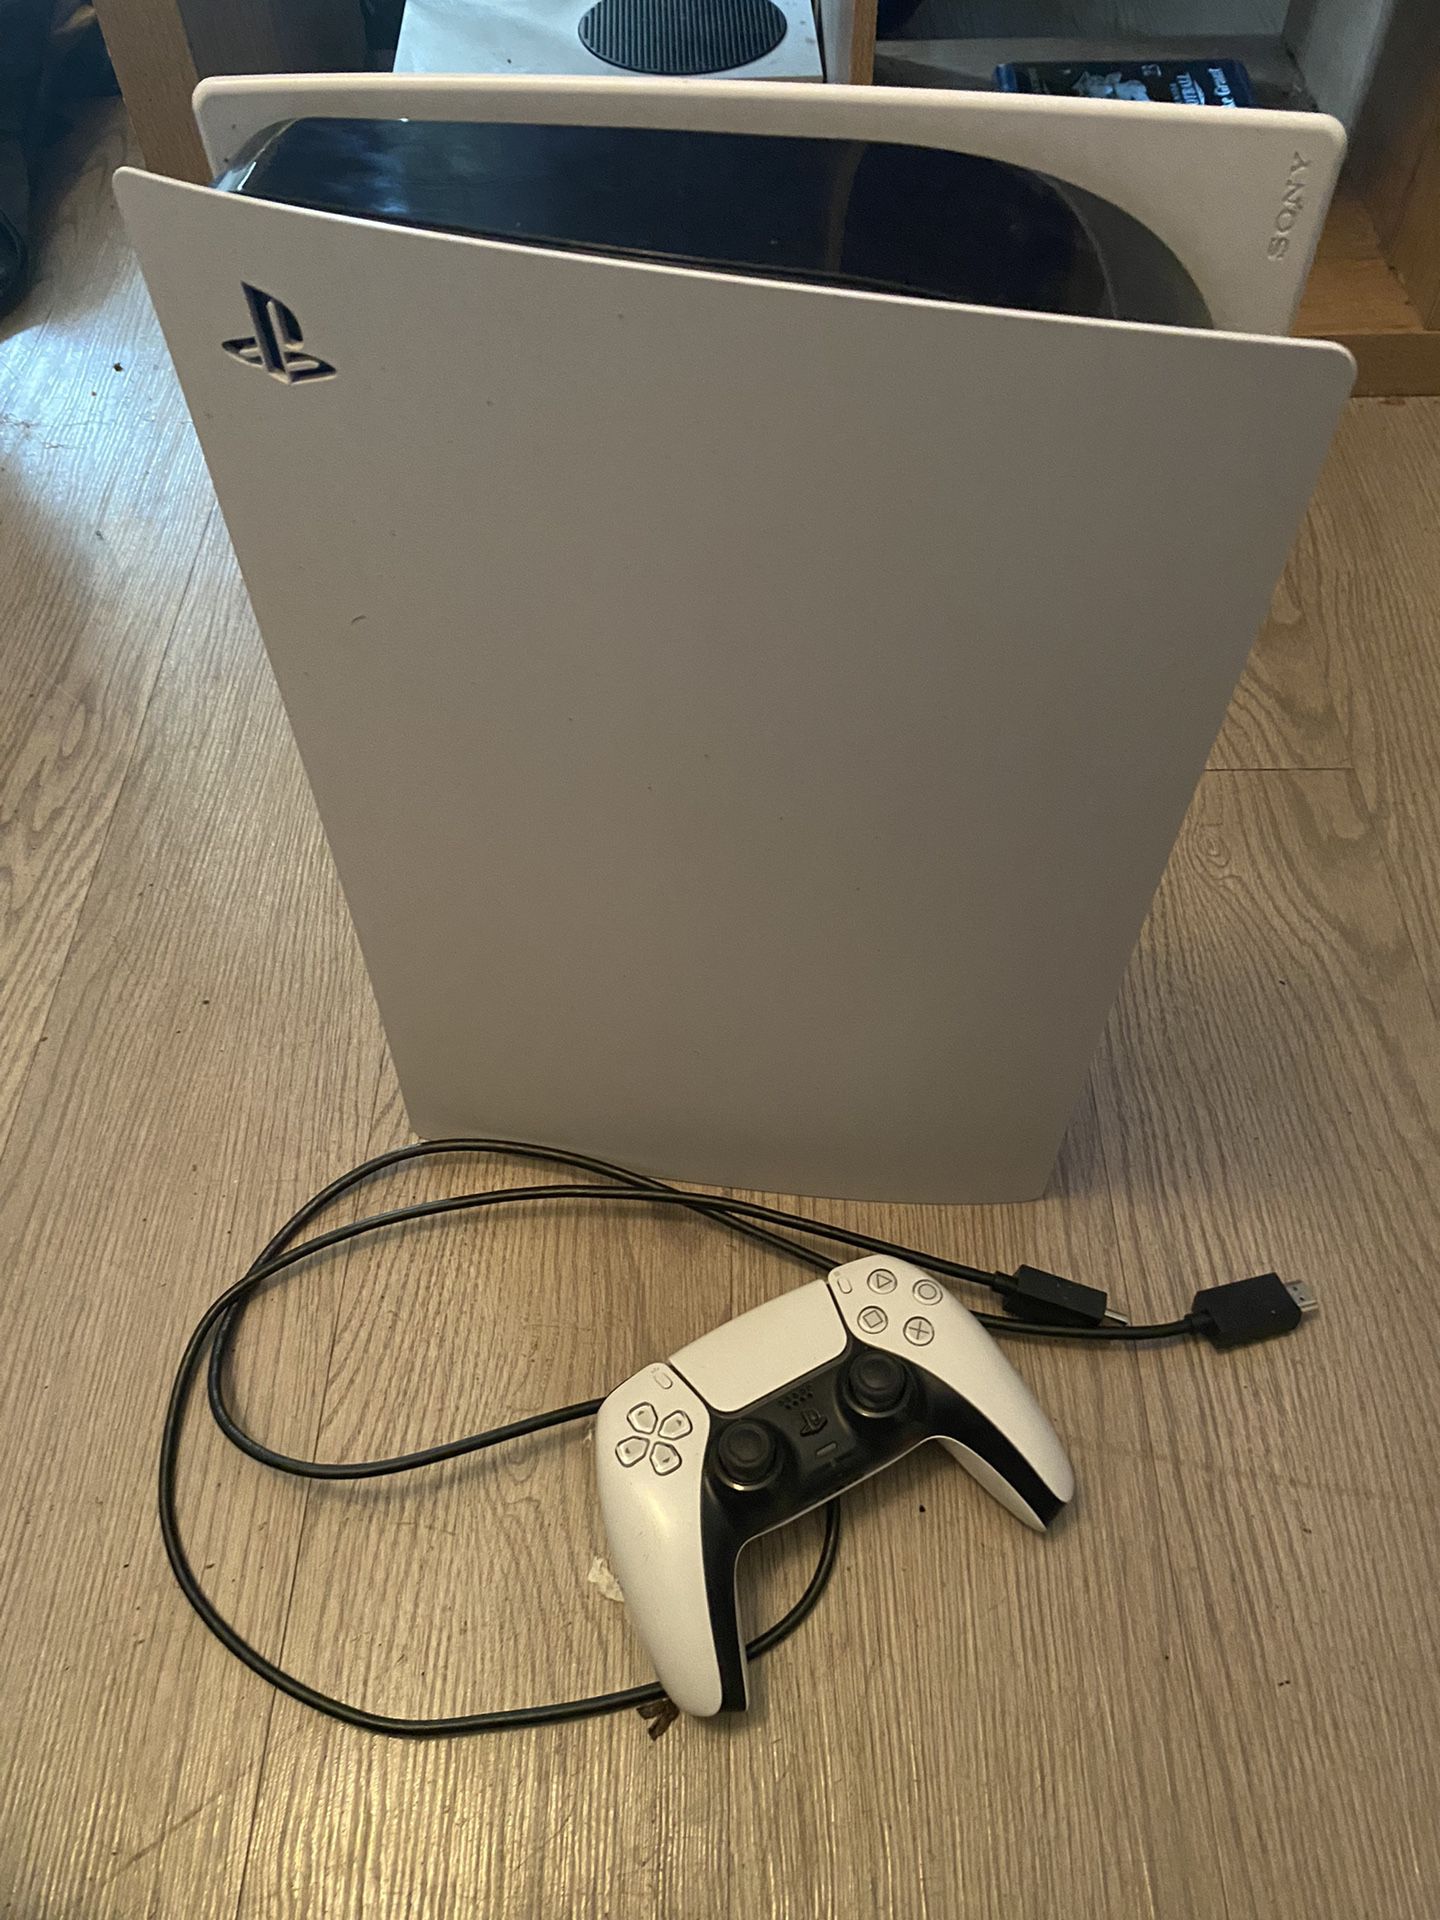 Ps5 comes with Controller